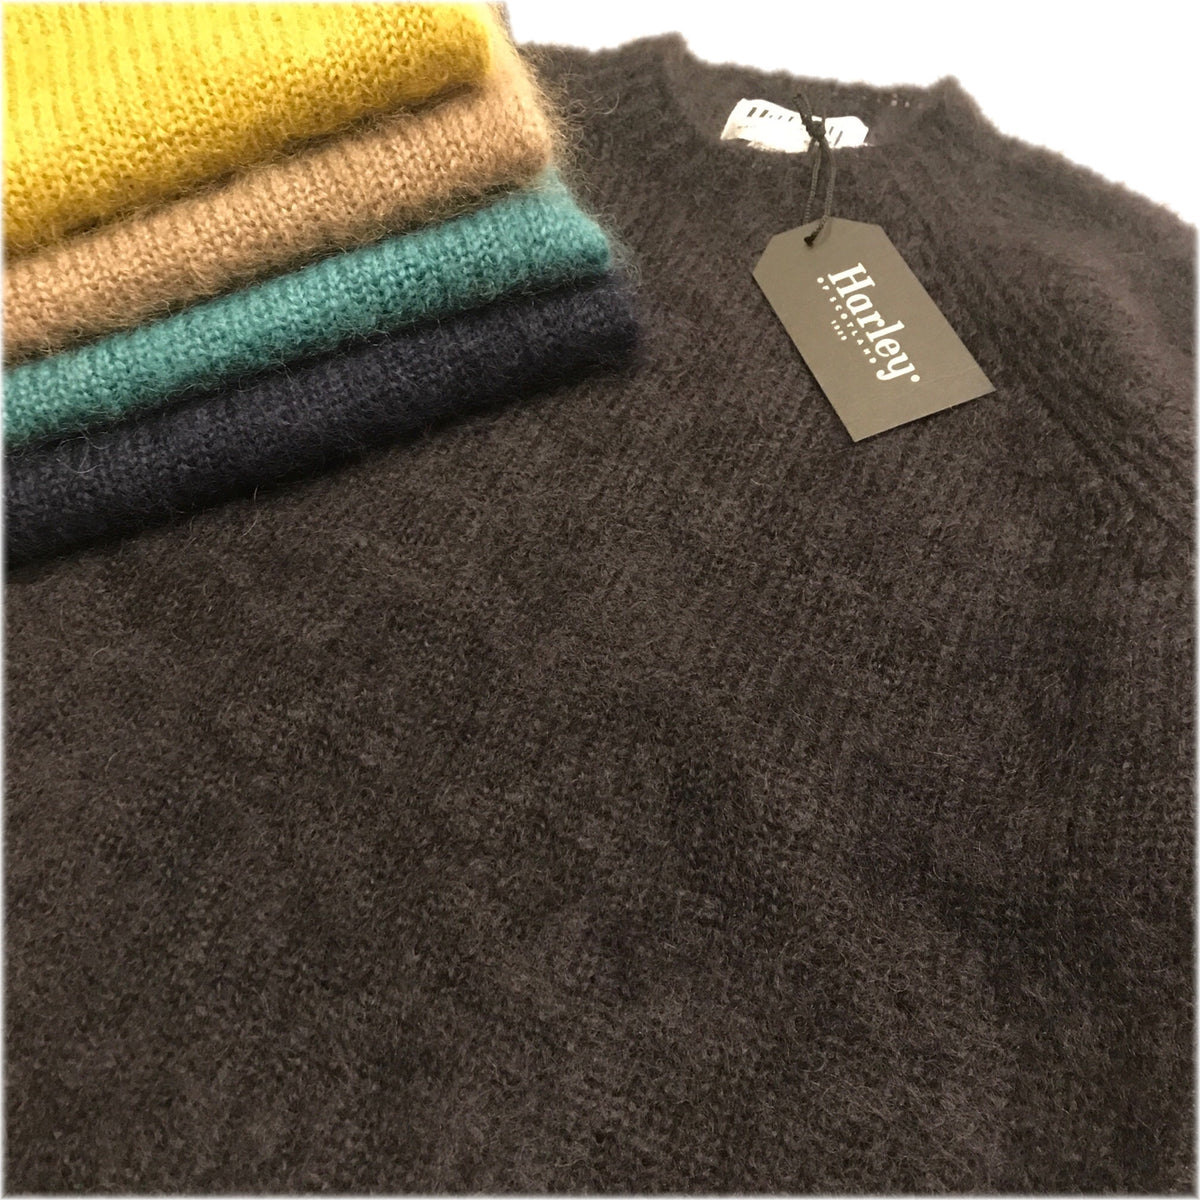 harley of scotland mohair nordic sweater